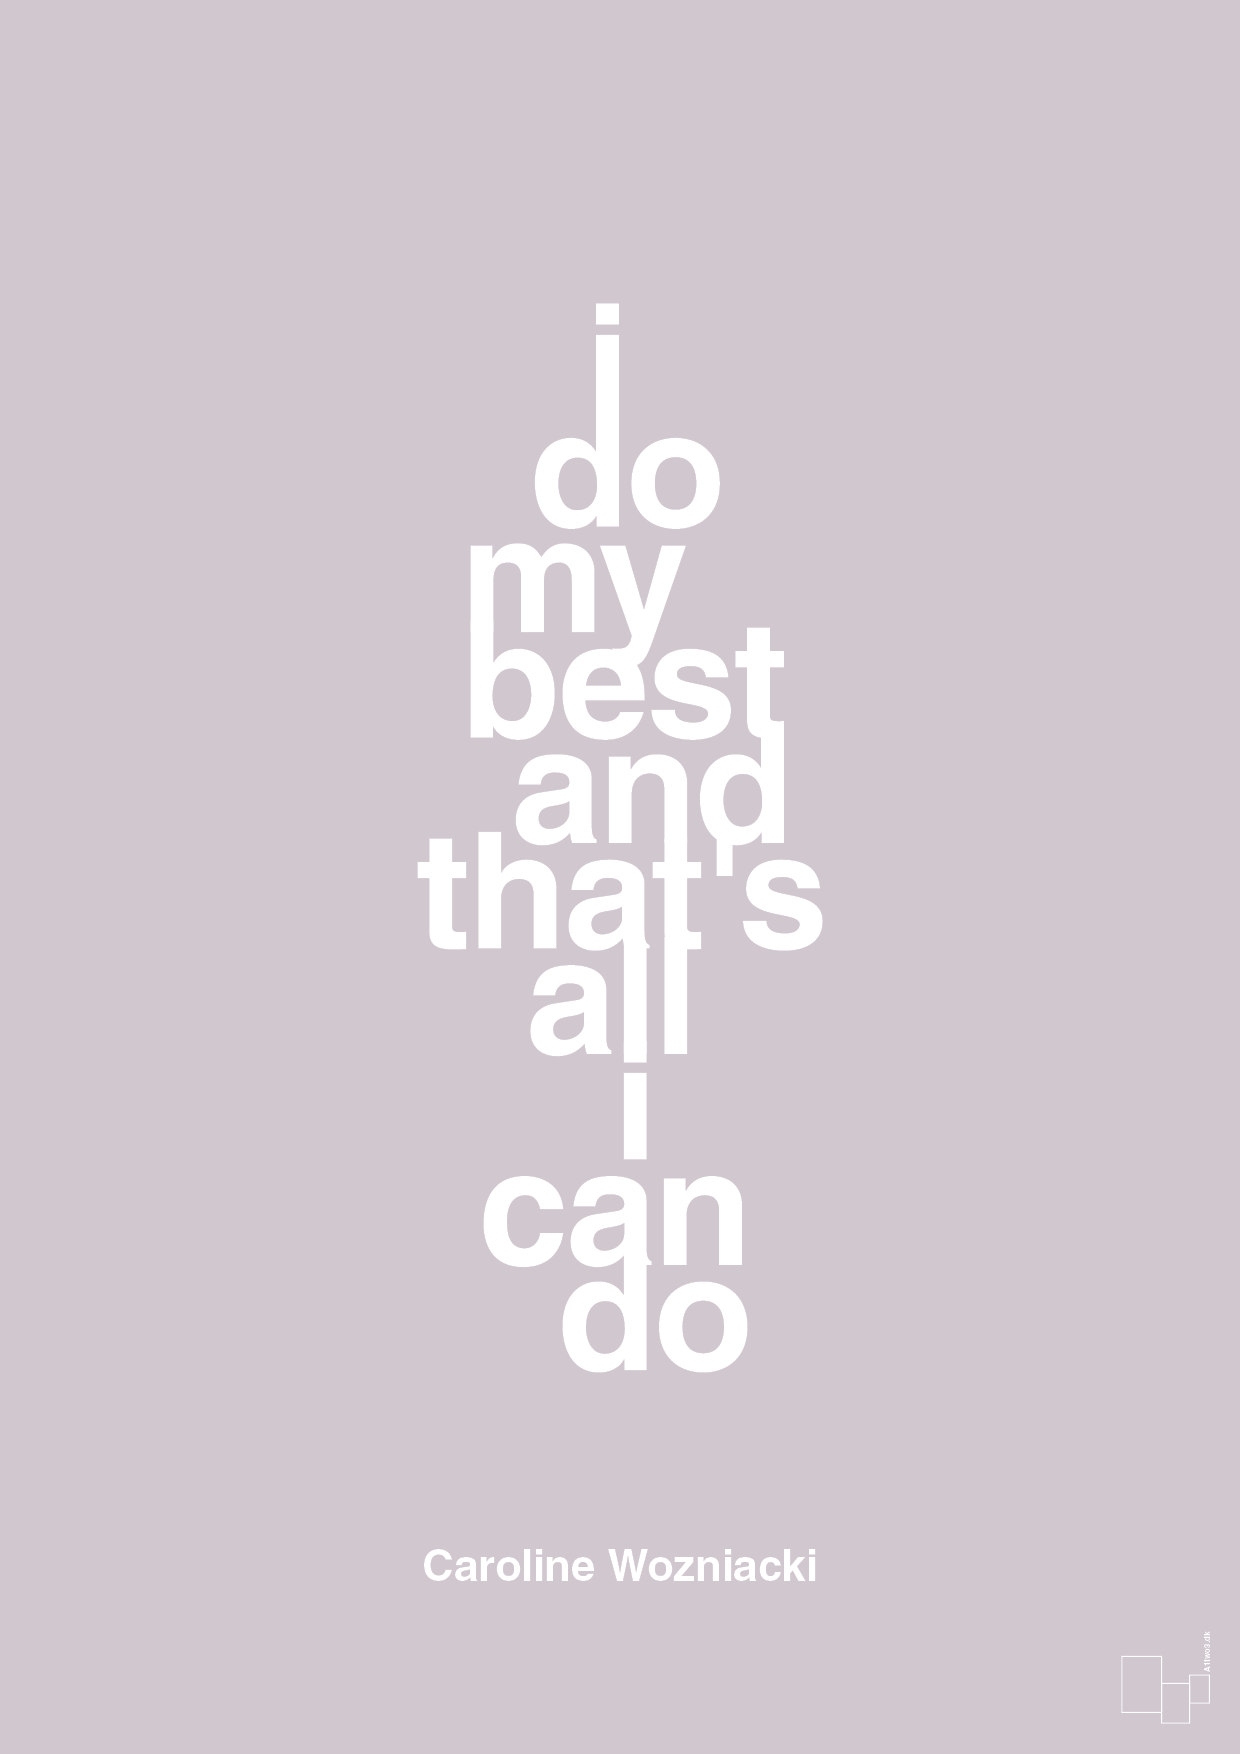 i do my best and that's all i can do - Plakat med Citater i Dusty Lilac